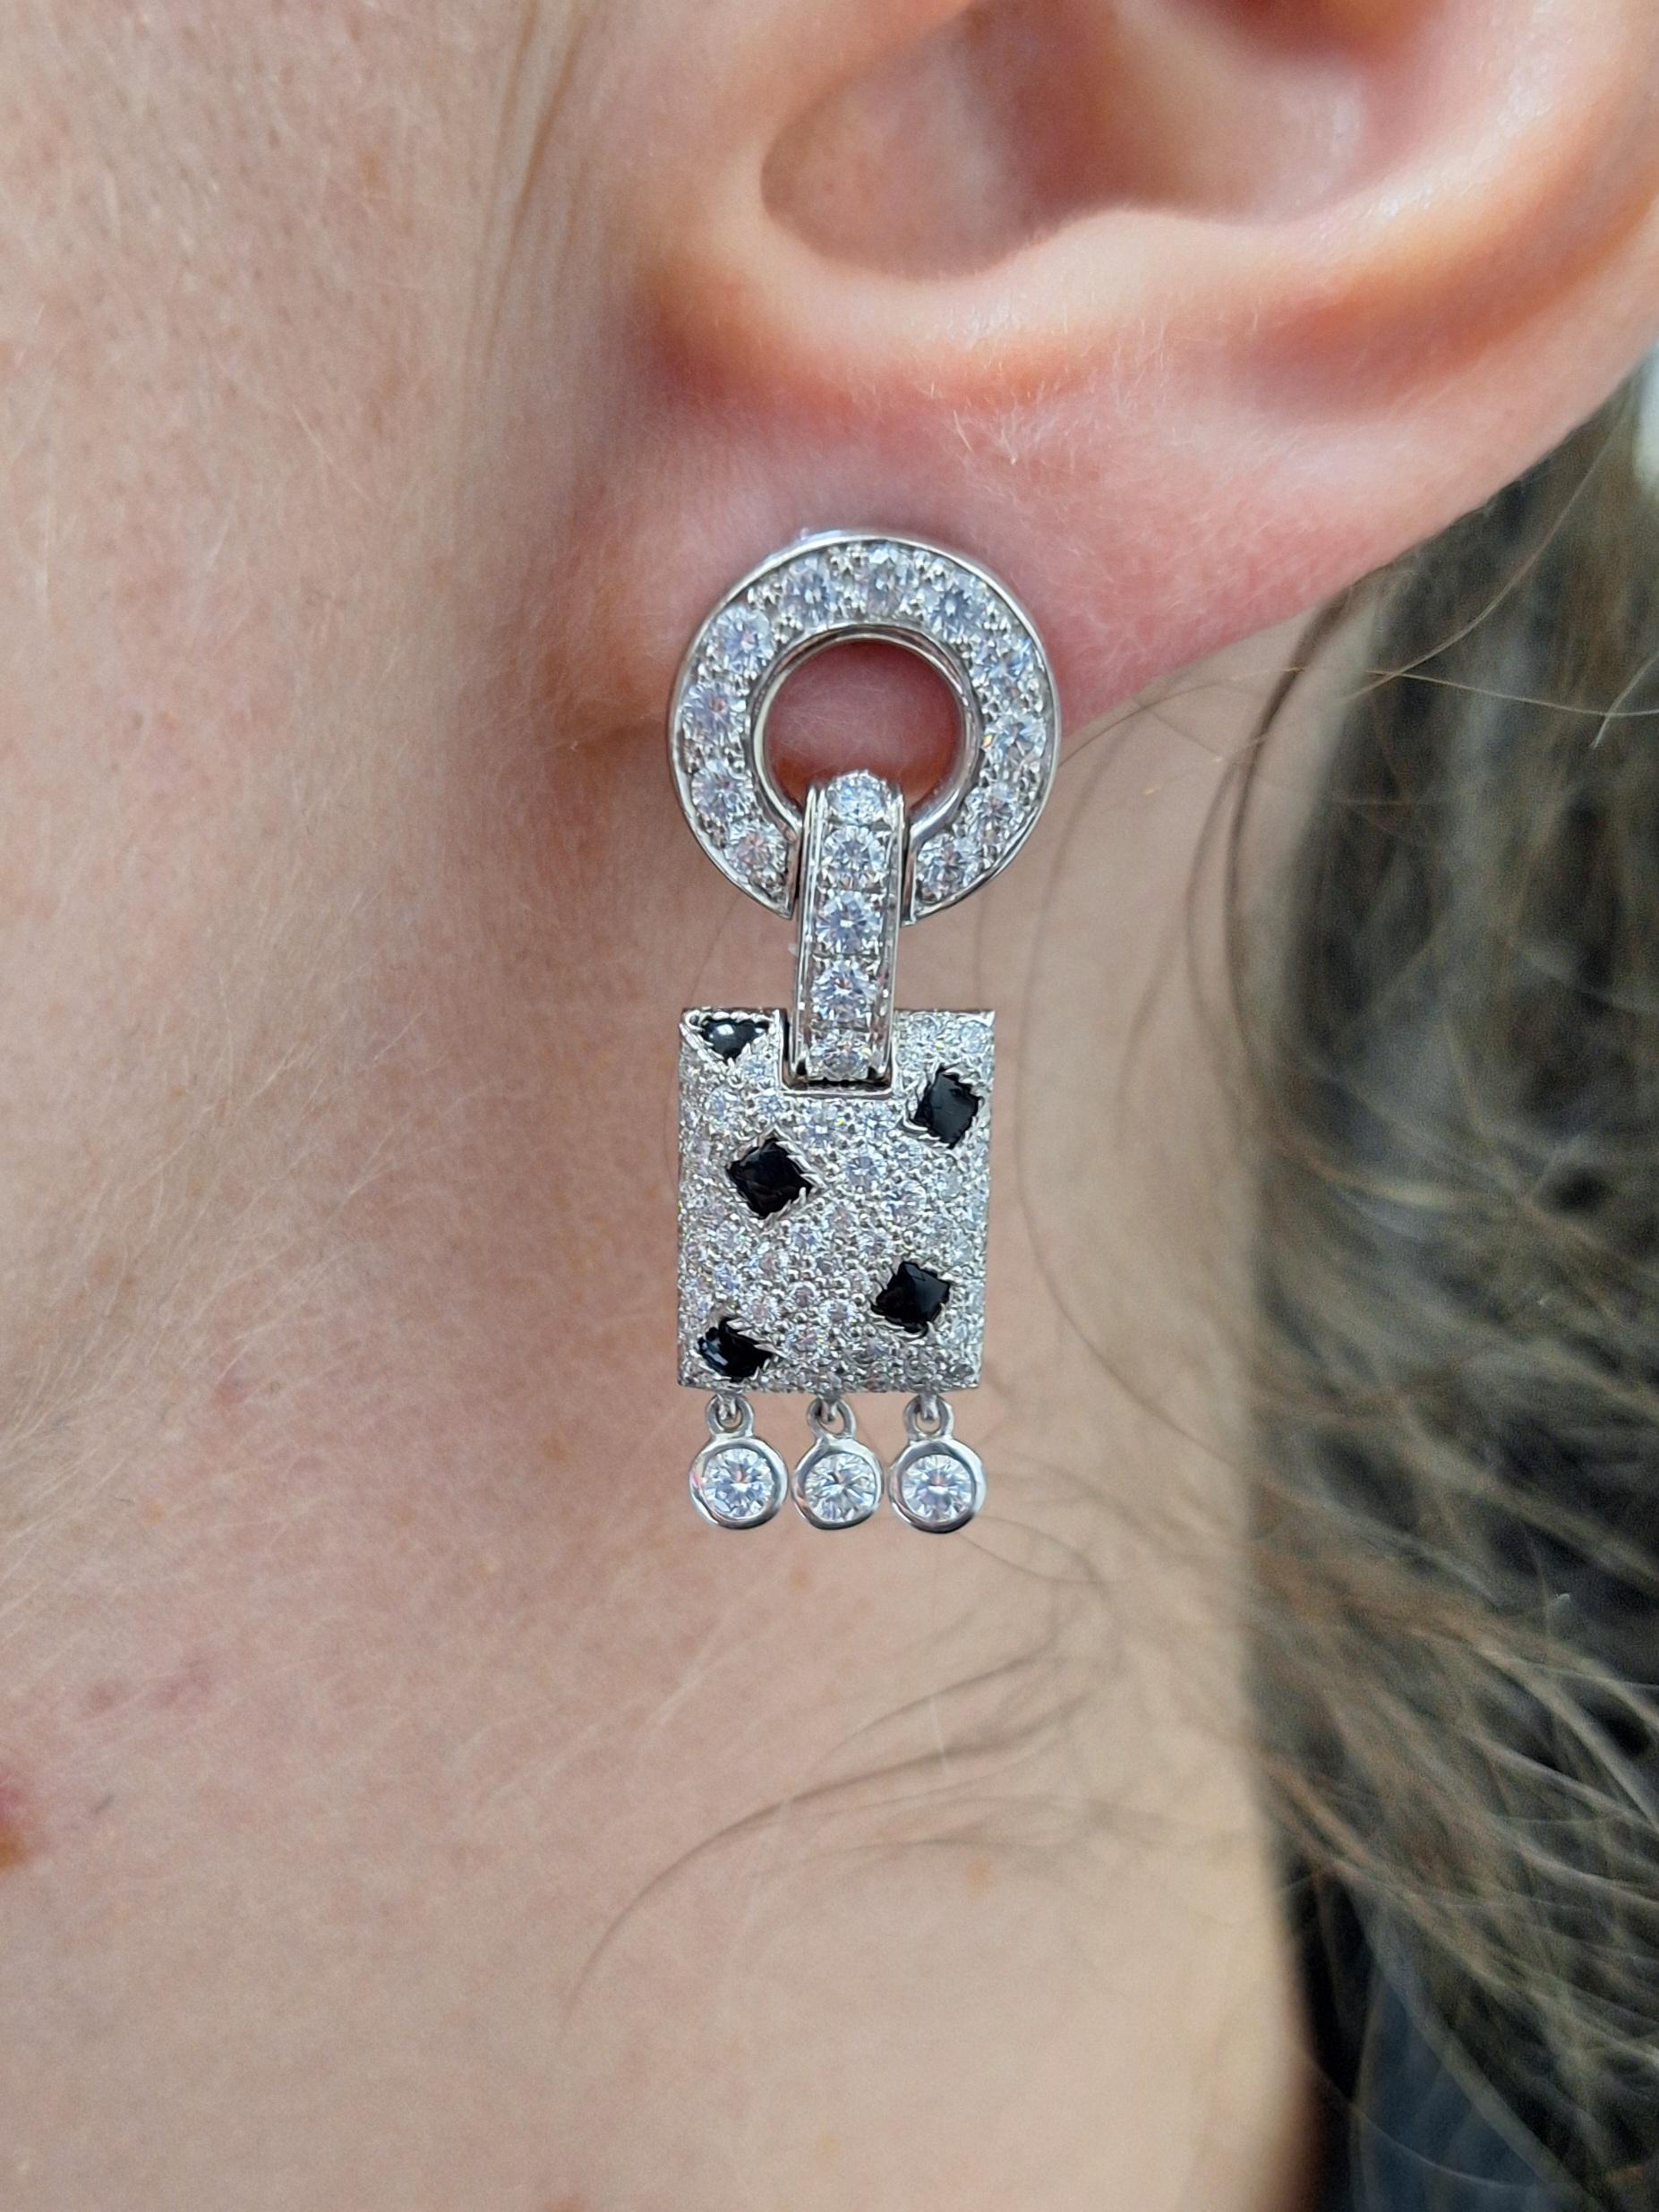 Cartier Pelage Panthère earrings crafted in 18 karat white gold. Each earring is set with high quality round cut diamonds and cabochon onyx for an estimated 2.40 carats total diamond weight. The alluring mix of diamonds and onyx mimic the skin of a